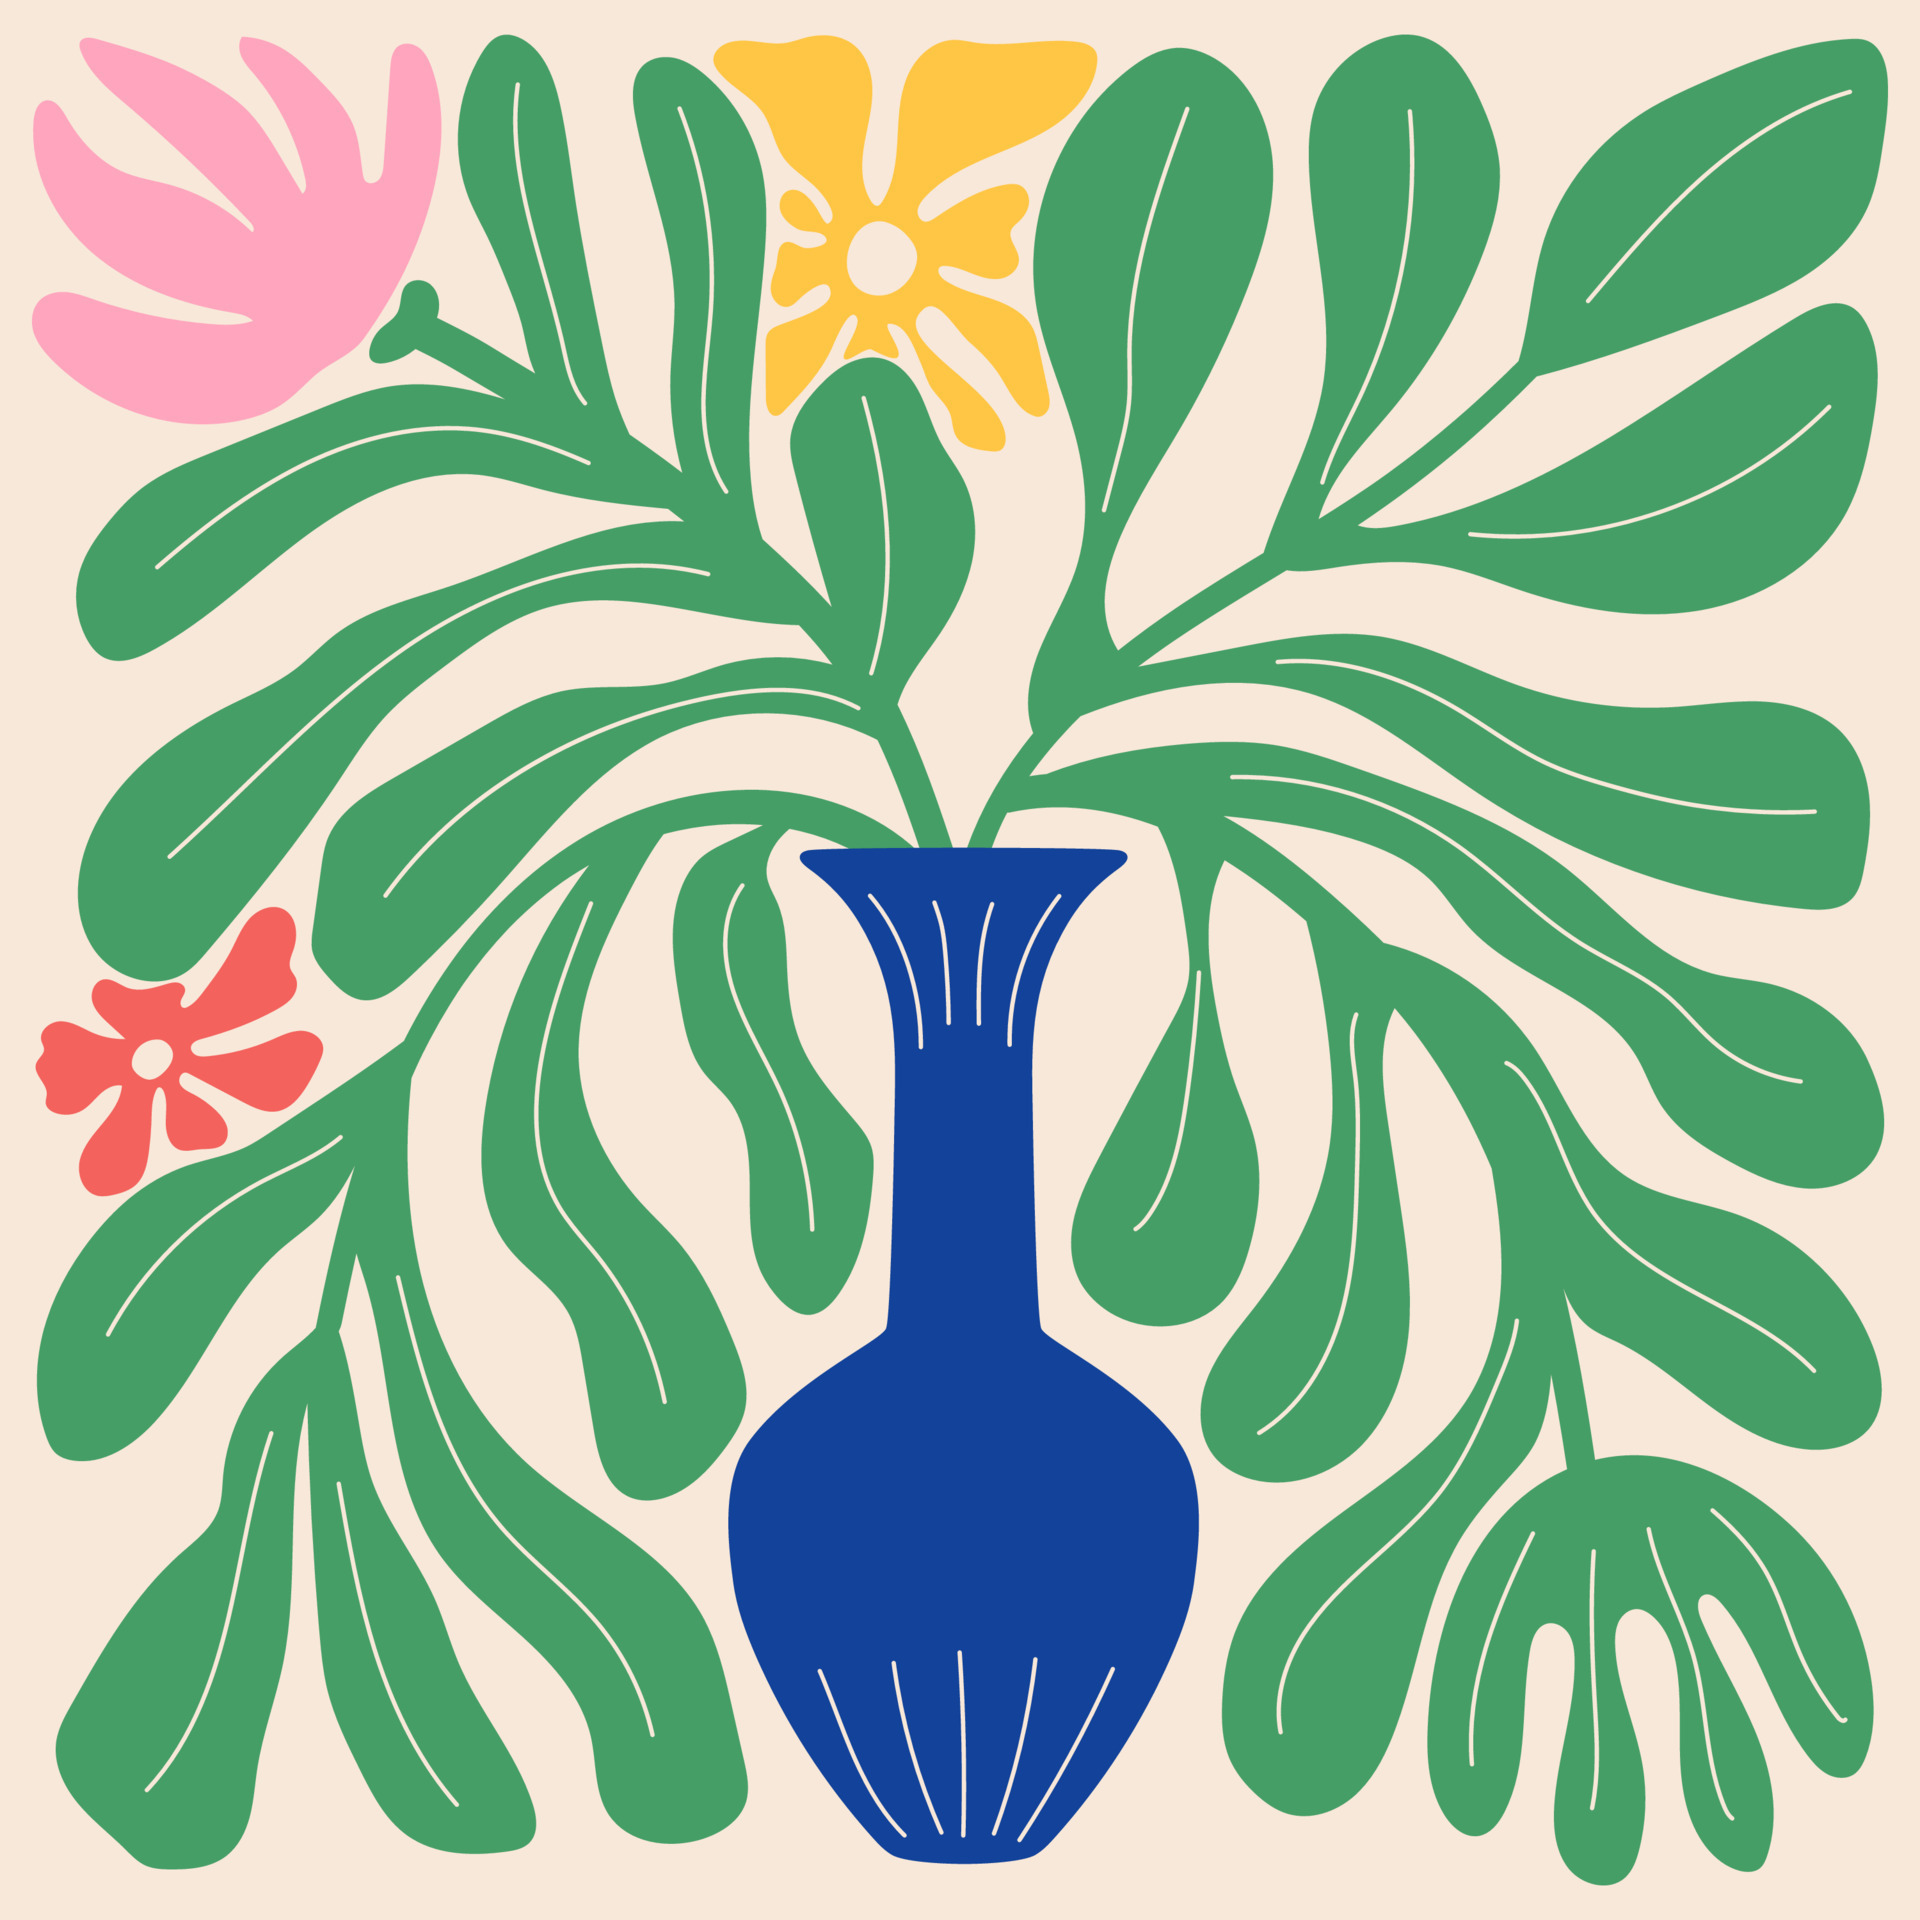 https://static.vecteezy.com/system/resources/previews/021/523/411/original/groovy-abstract-organic-plant-shapes-art-matisse-floral-poster-in-trendy-retro-60s-70s-style-vector.jpg